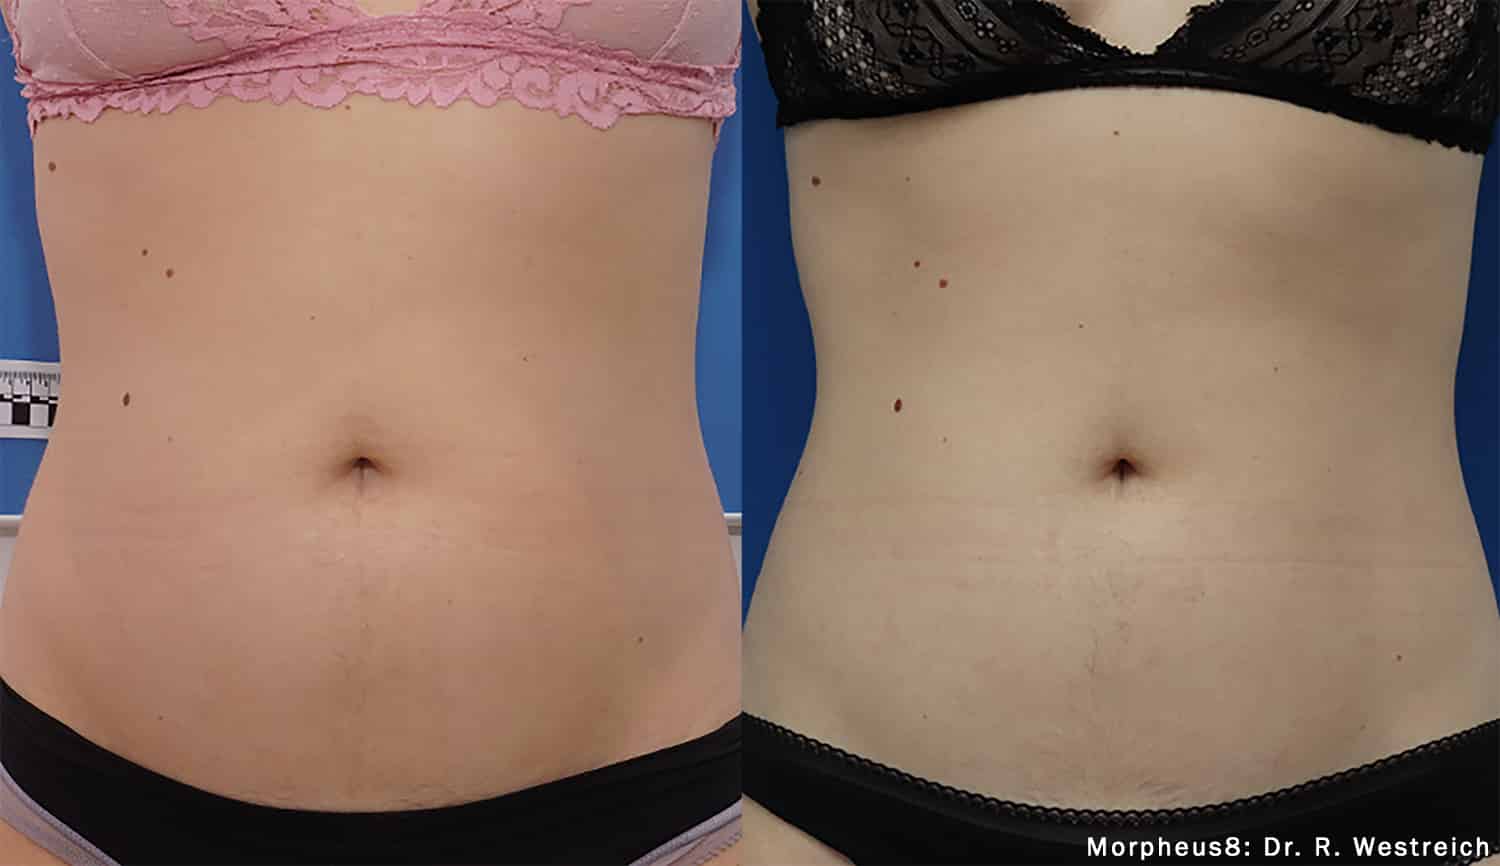 Before and after abdomen treatment results